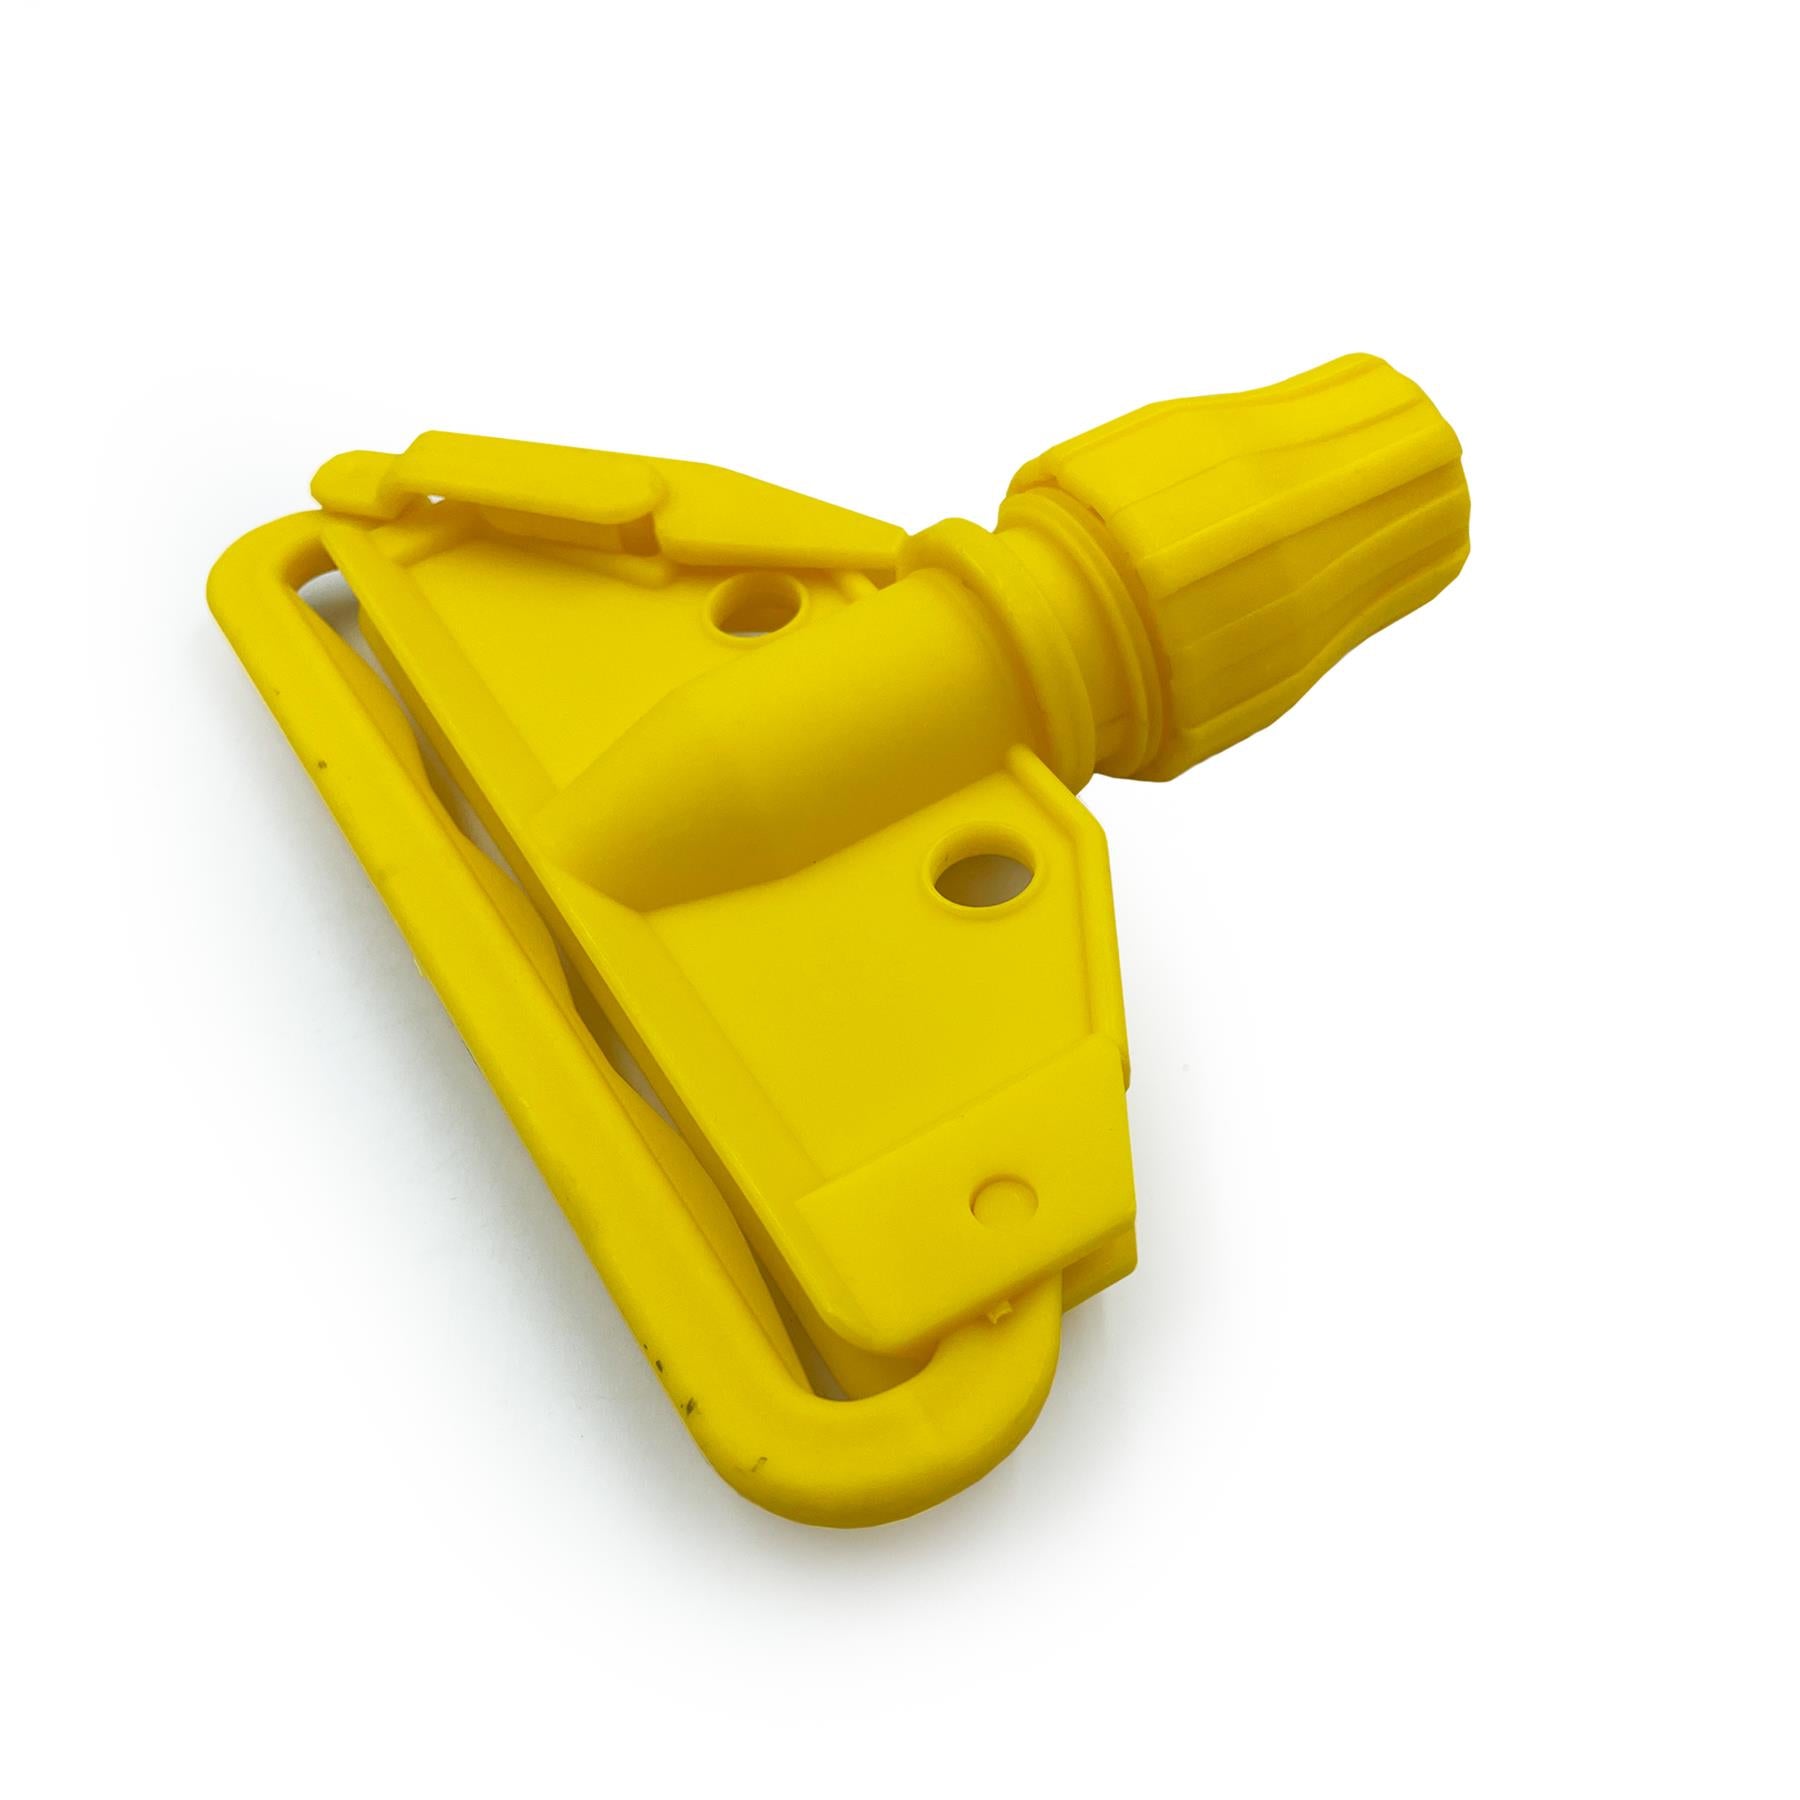 Colour Coded Yellow Plastic Kentucky Mop Clip